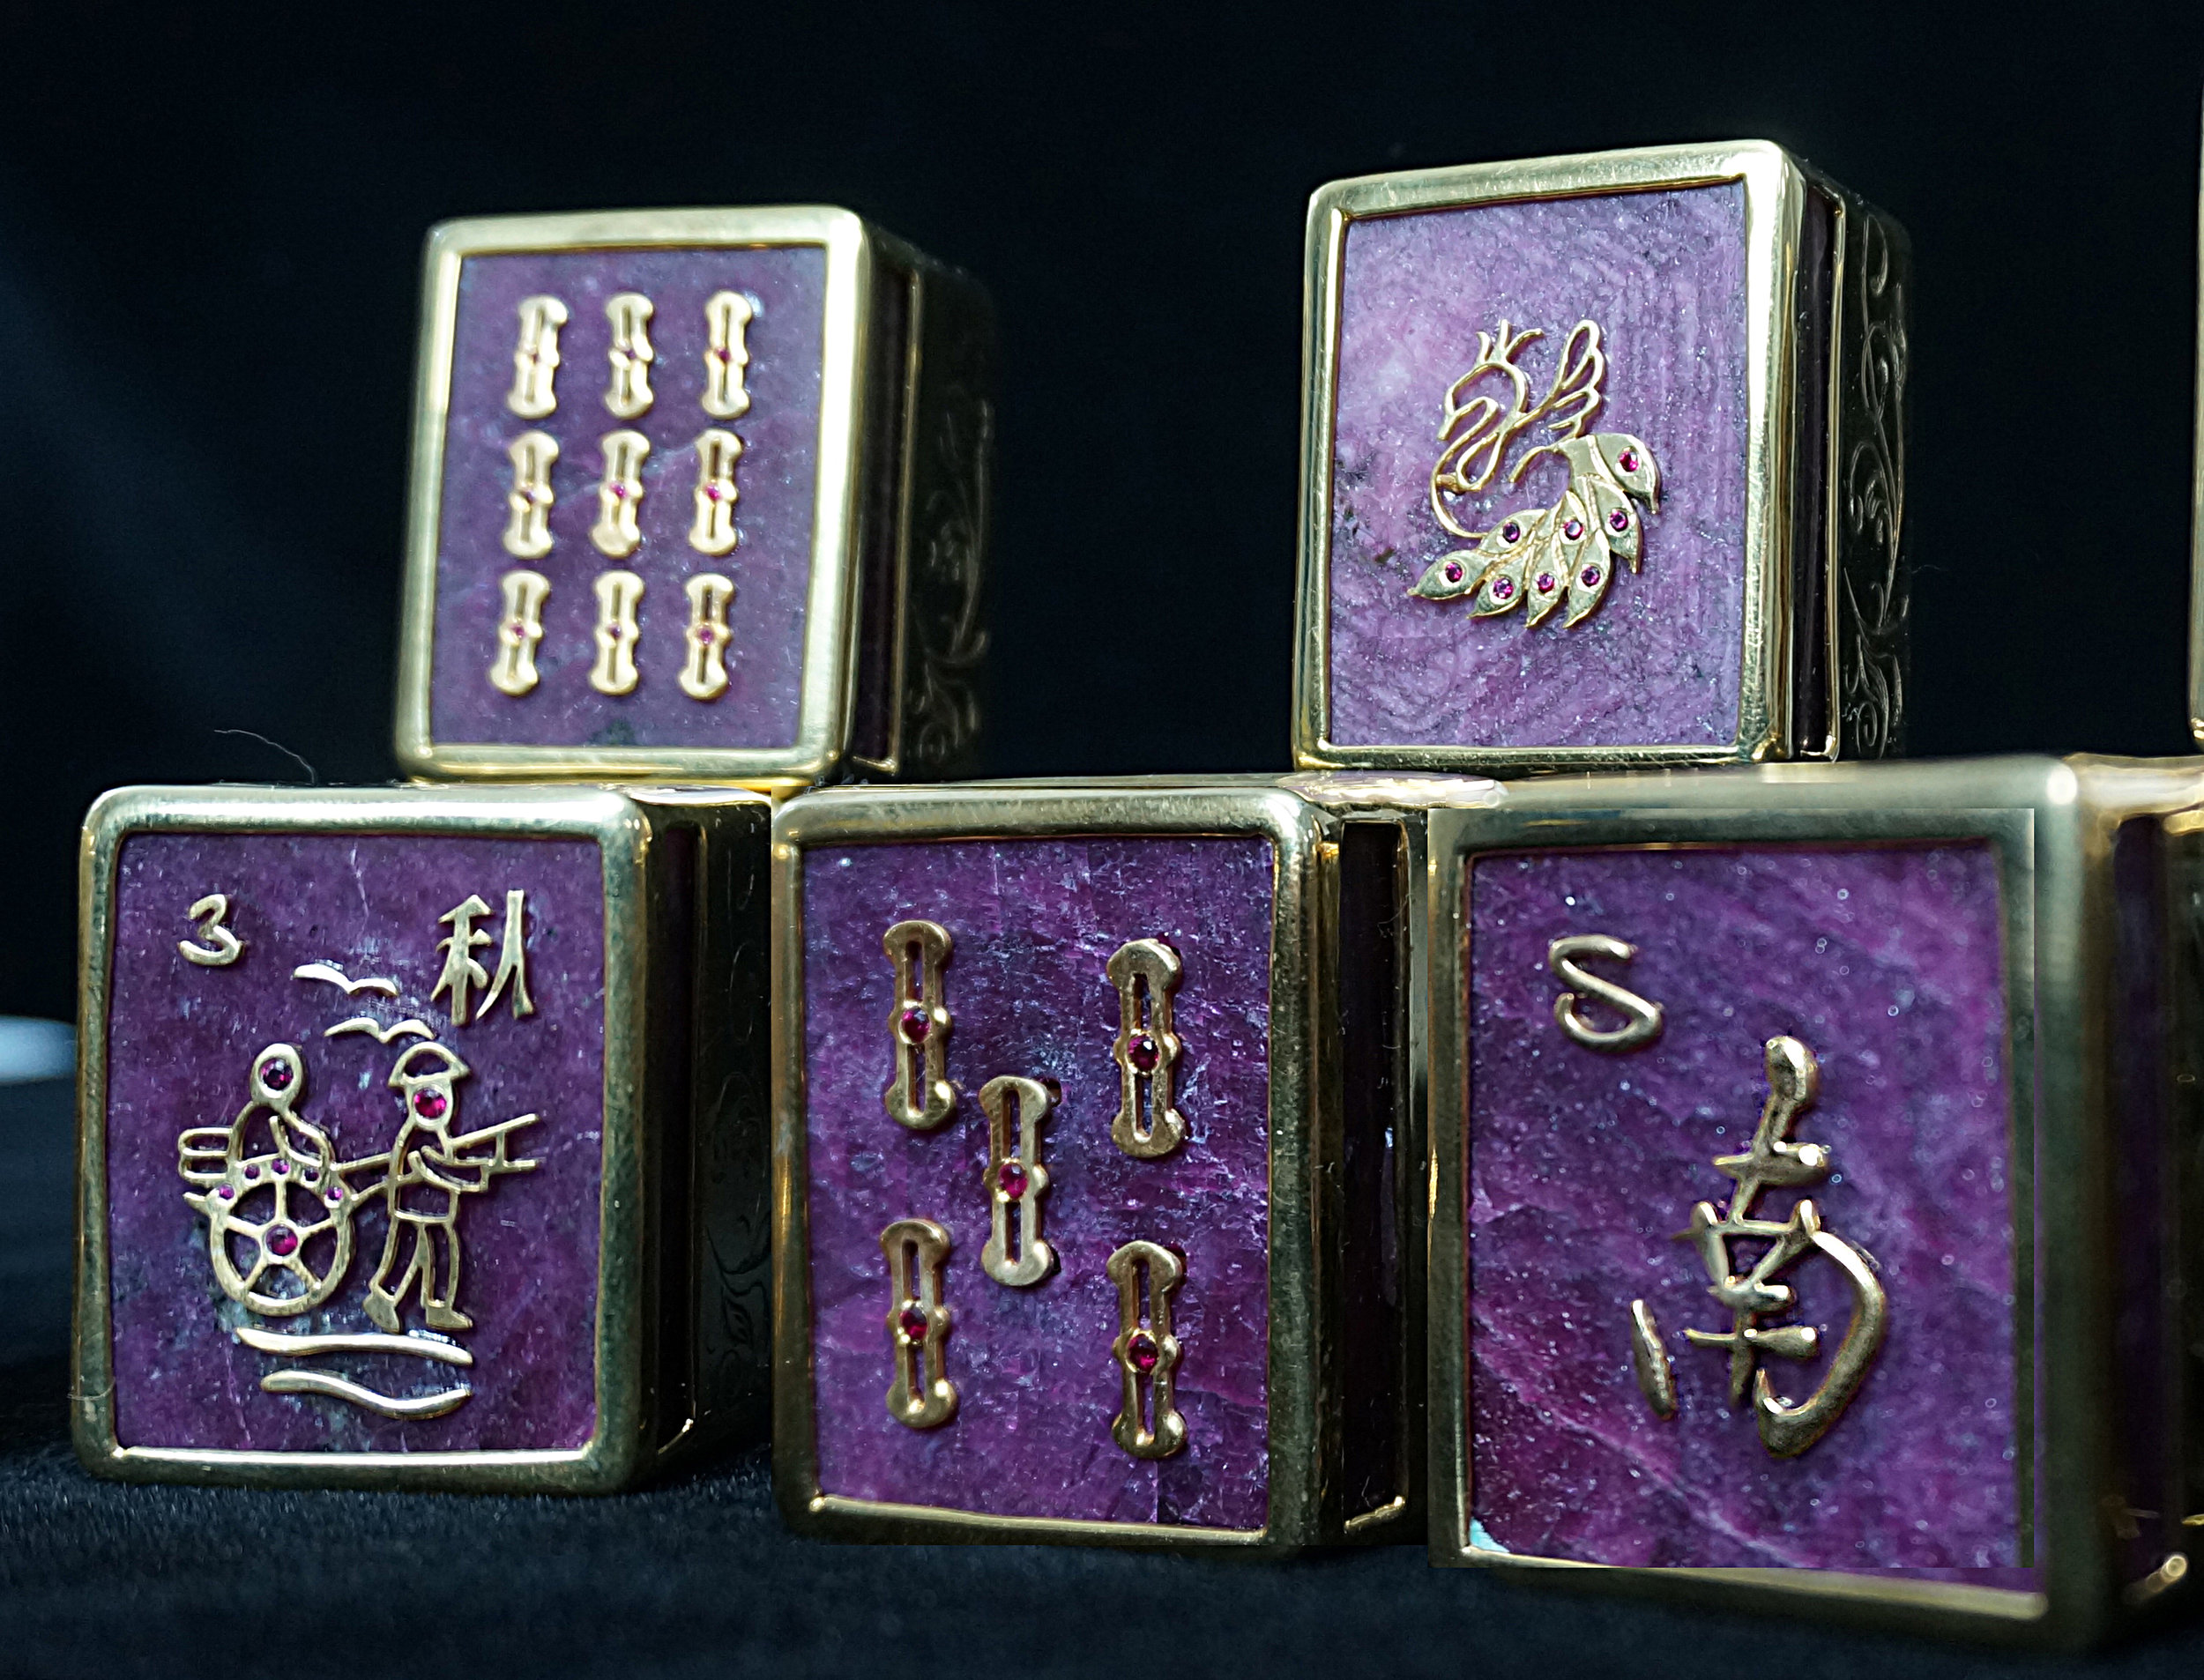 S.T. DUPONT HAUTE CREATION THE WORLDS MOST LUXURIOUS MAHJONG SET